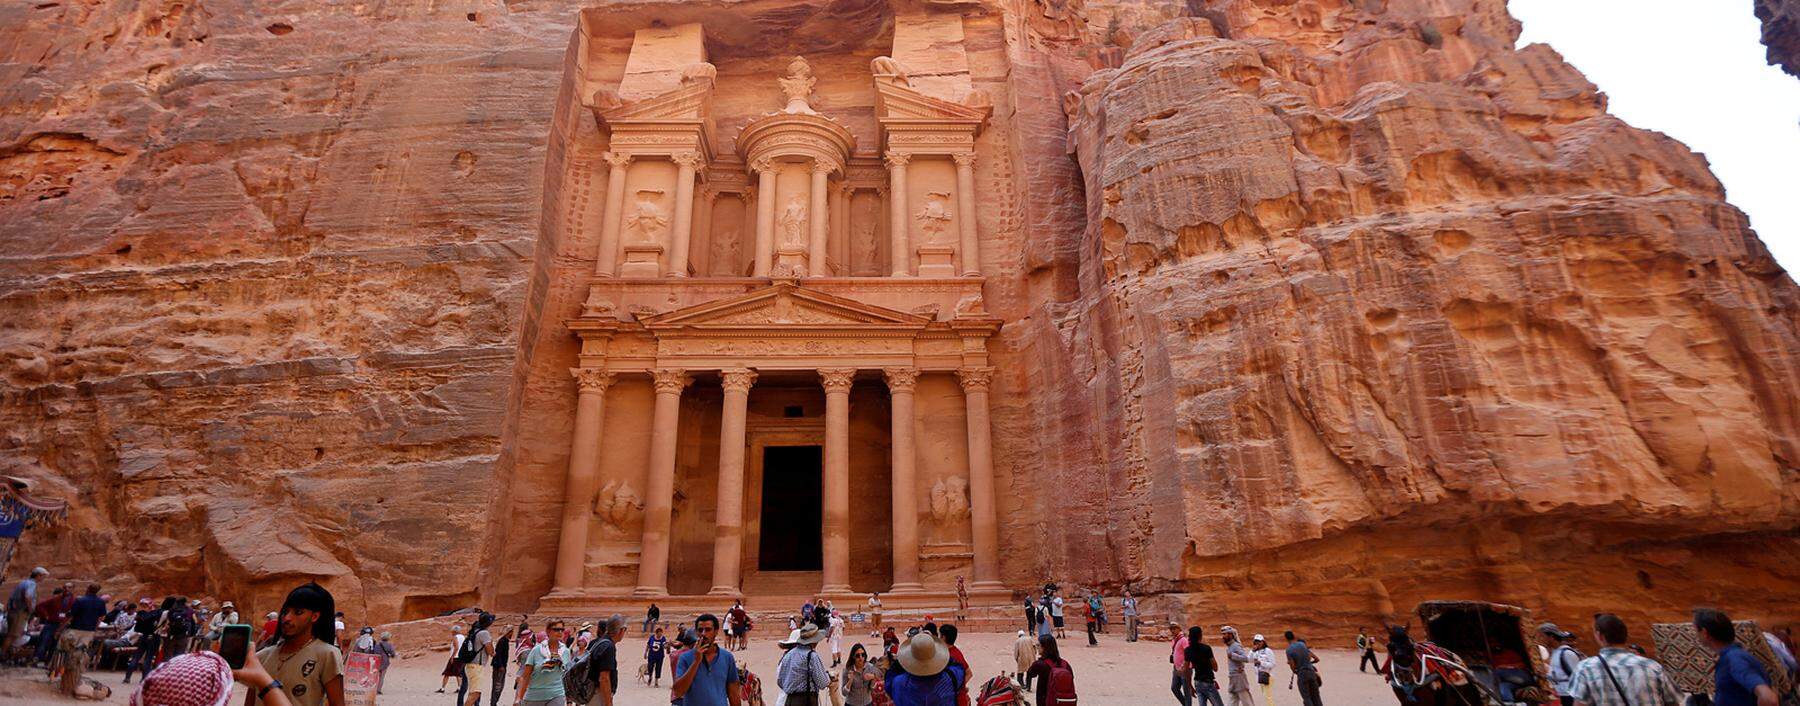 Tourists take pictures in front of the treasury site in the ancient city of Petra, south of Amman